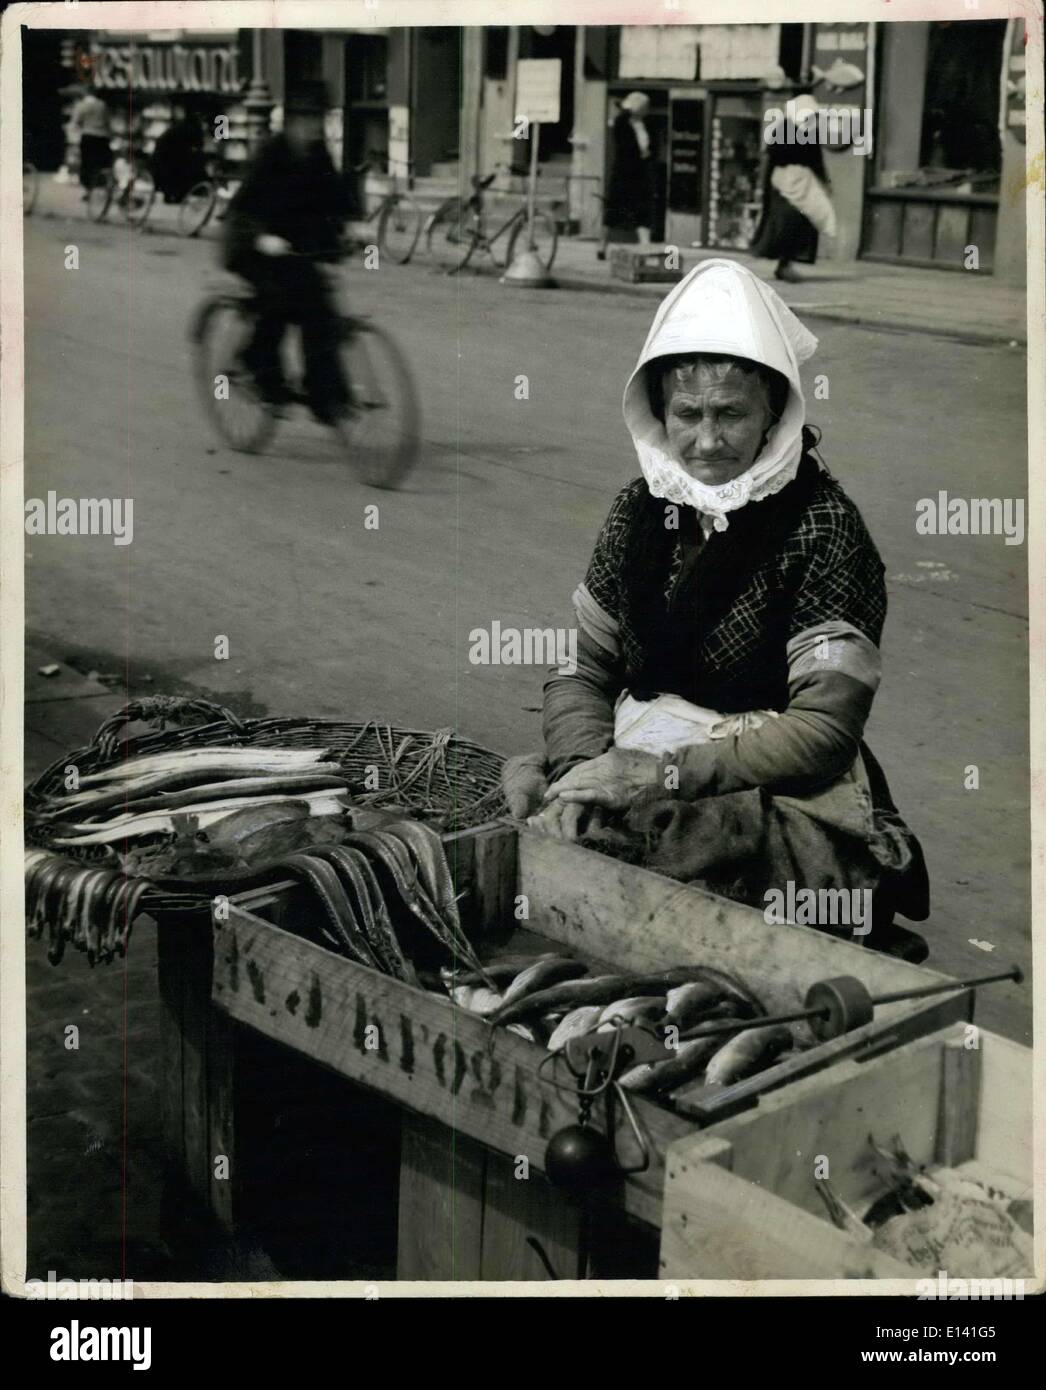 Mar. 31, 2012 - The fish market. In Copenhagen we find old ladies such as in this picture selling dish along the banks of the numerous canals. Stock Photo